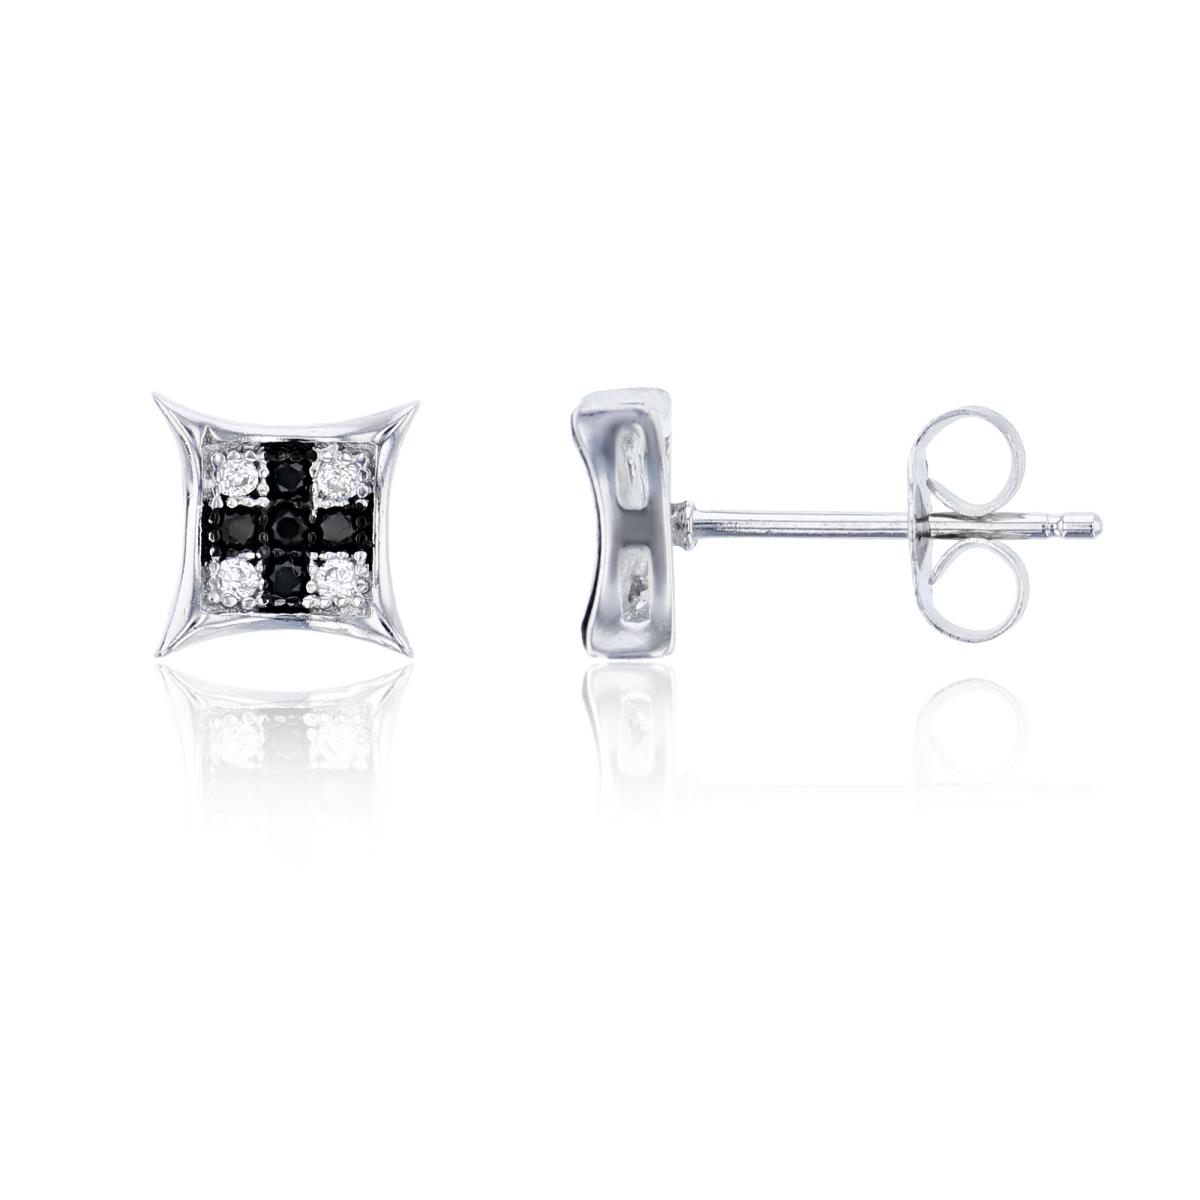 Sterling Silver Black & White 3x3mm Curved Square Stud Earring